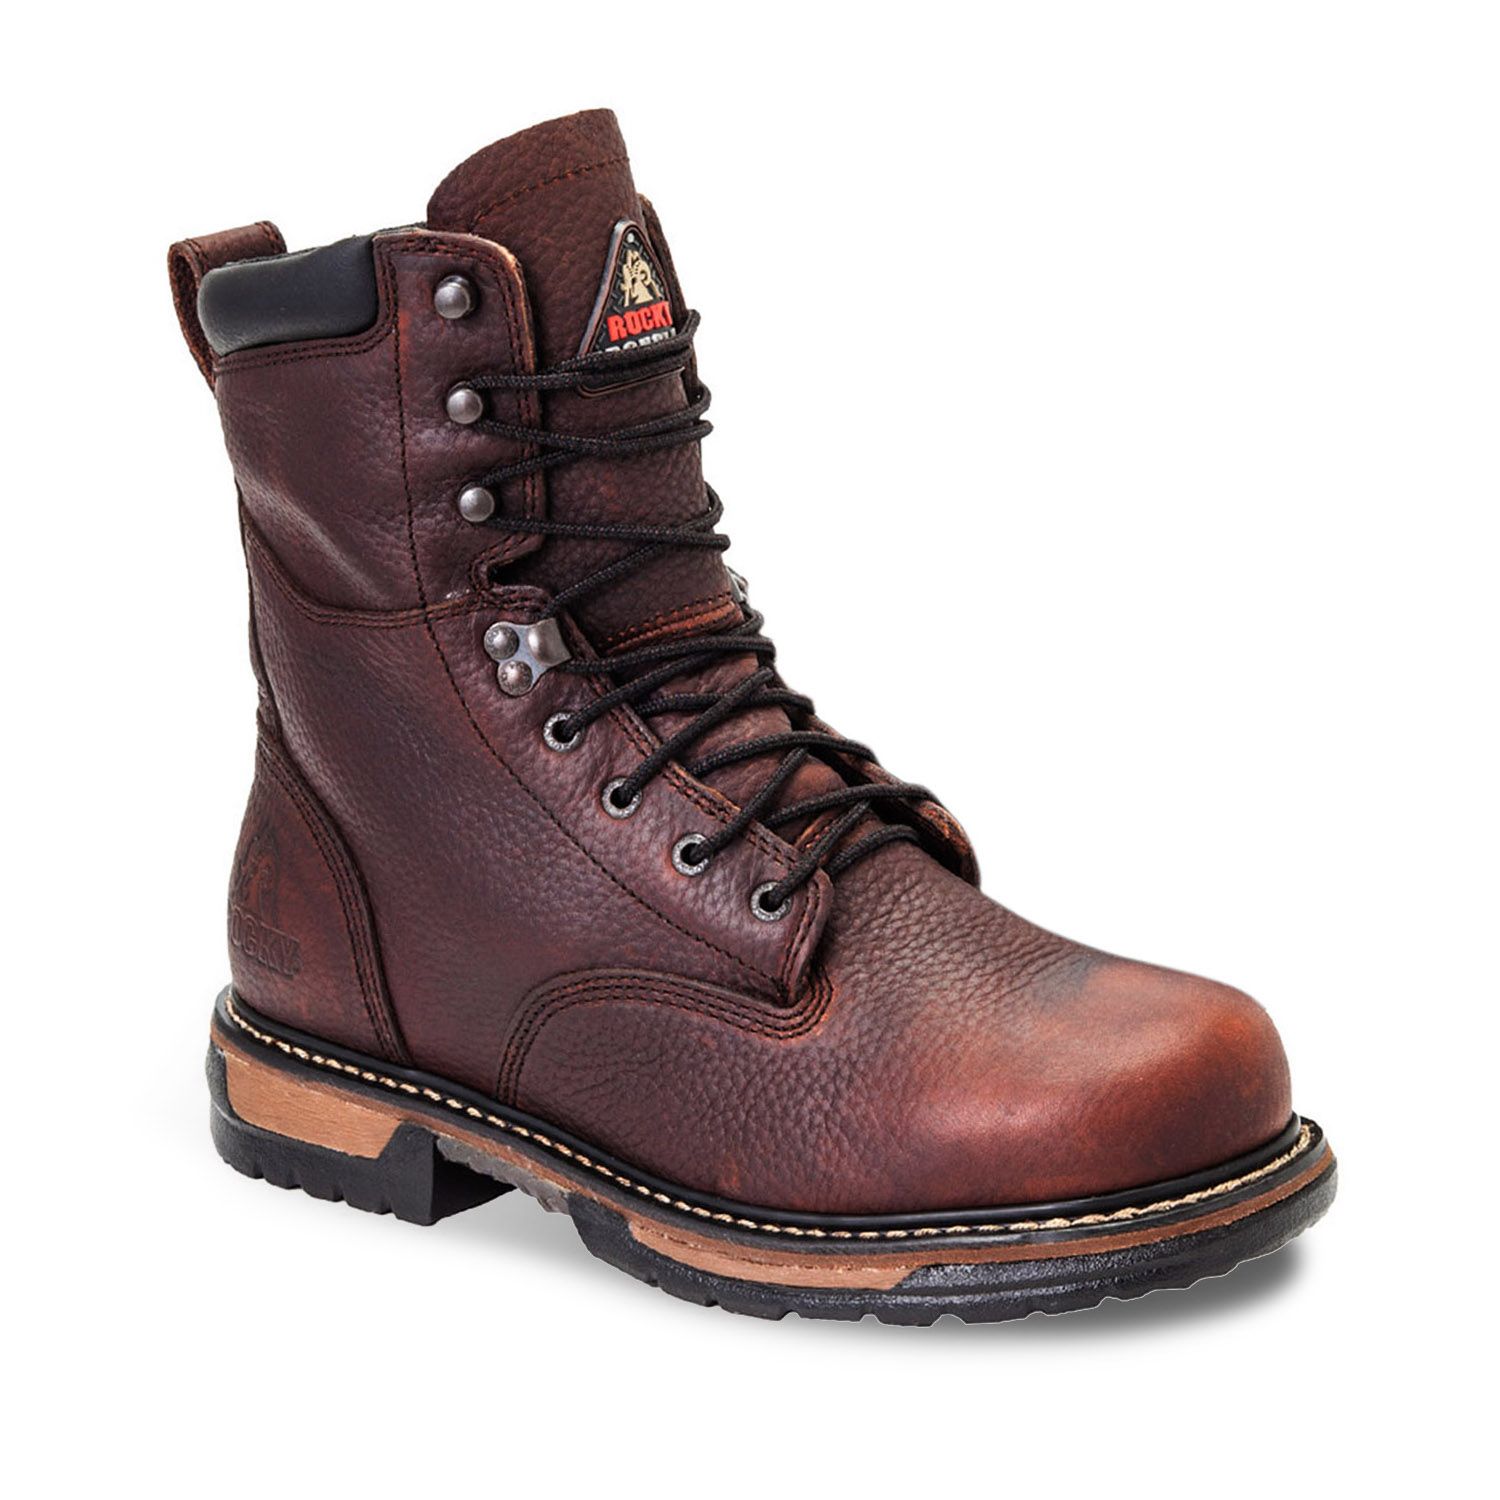 kohls work boots in store